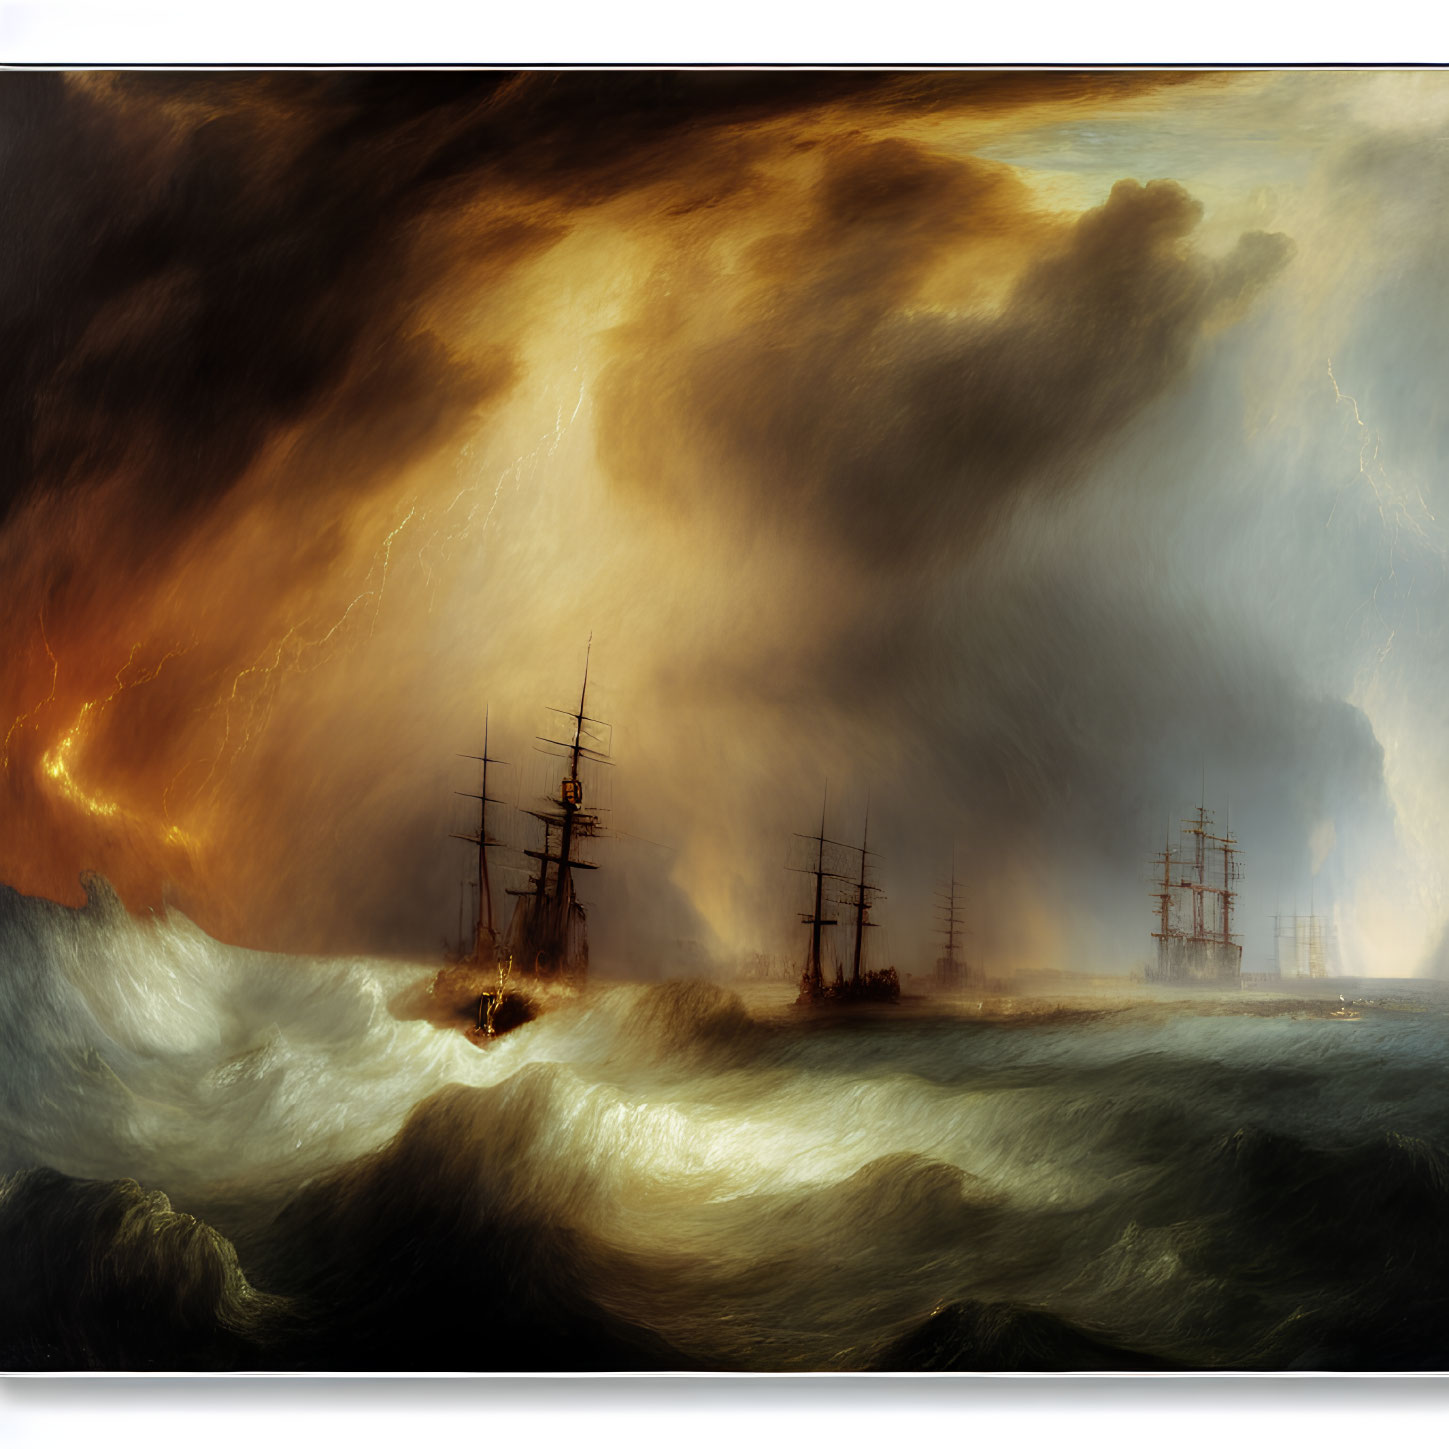 Historic sailing ships in stormy sea battle with fiery glow.